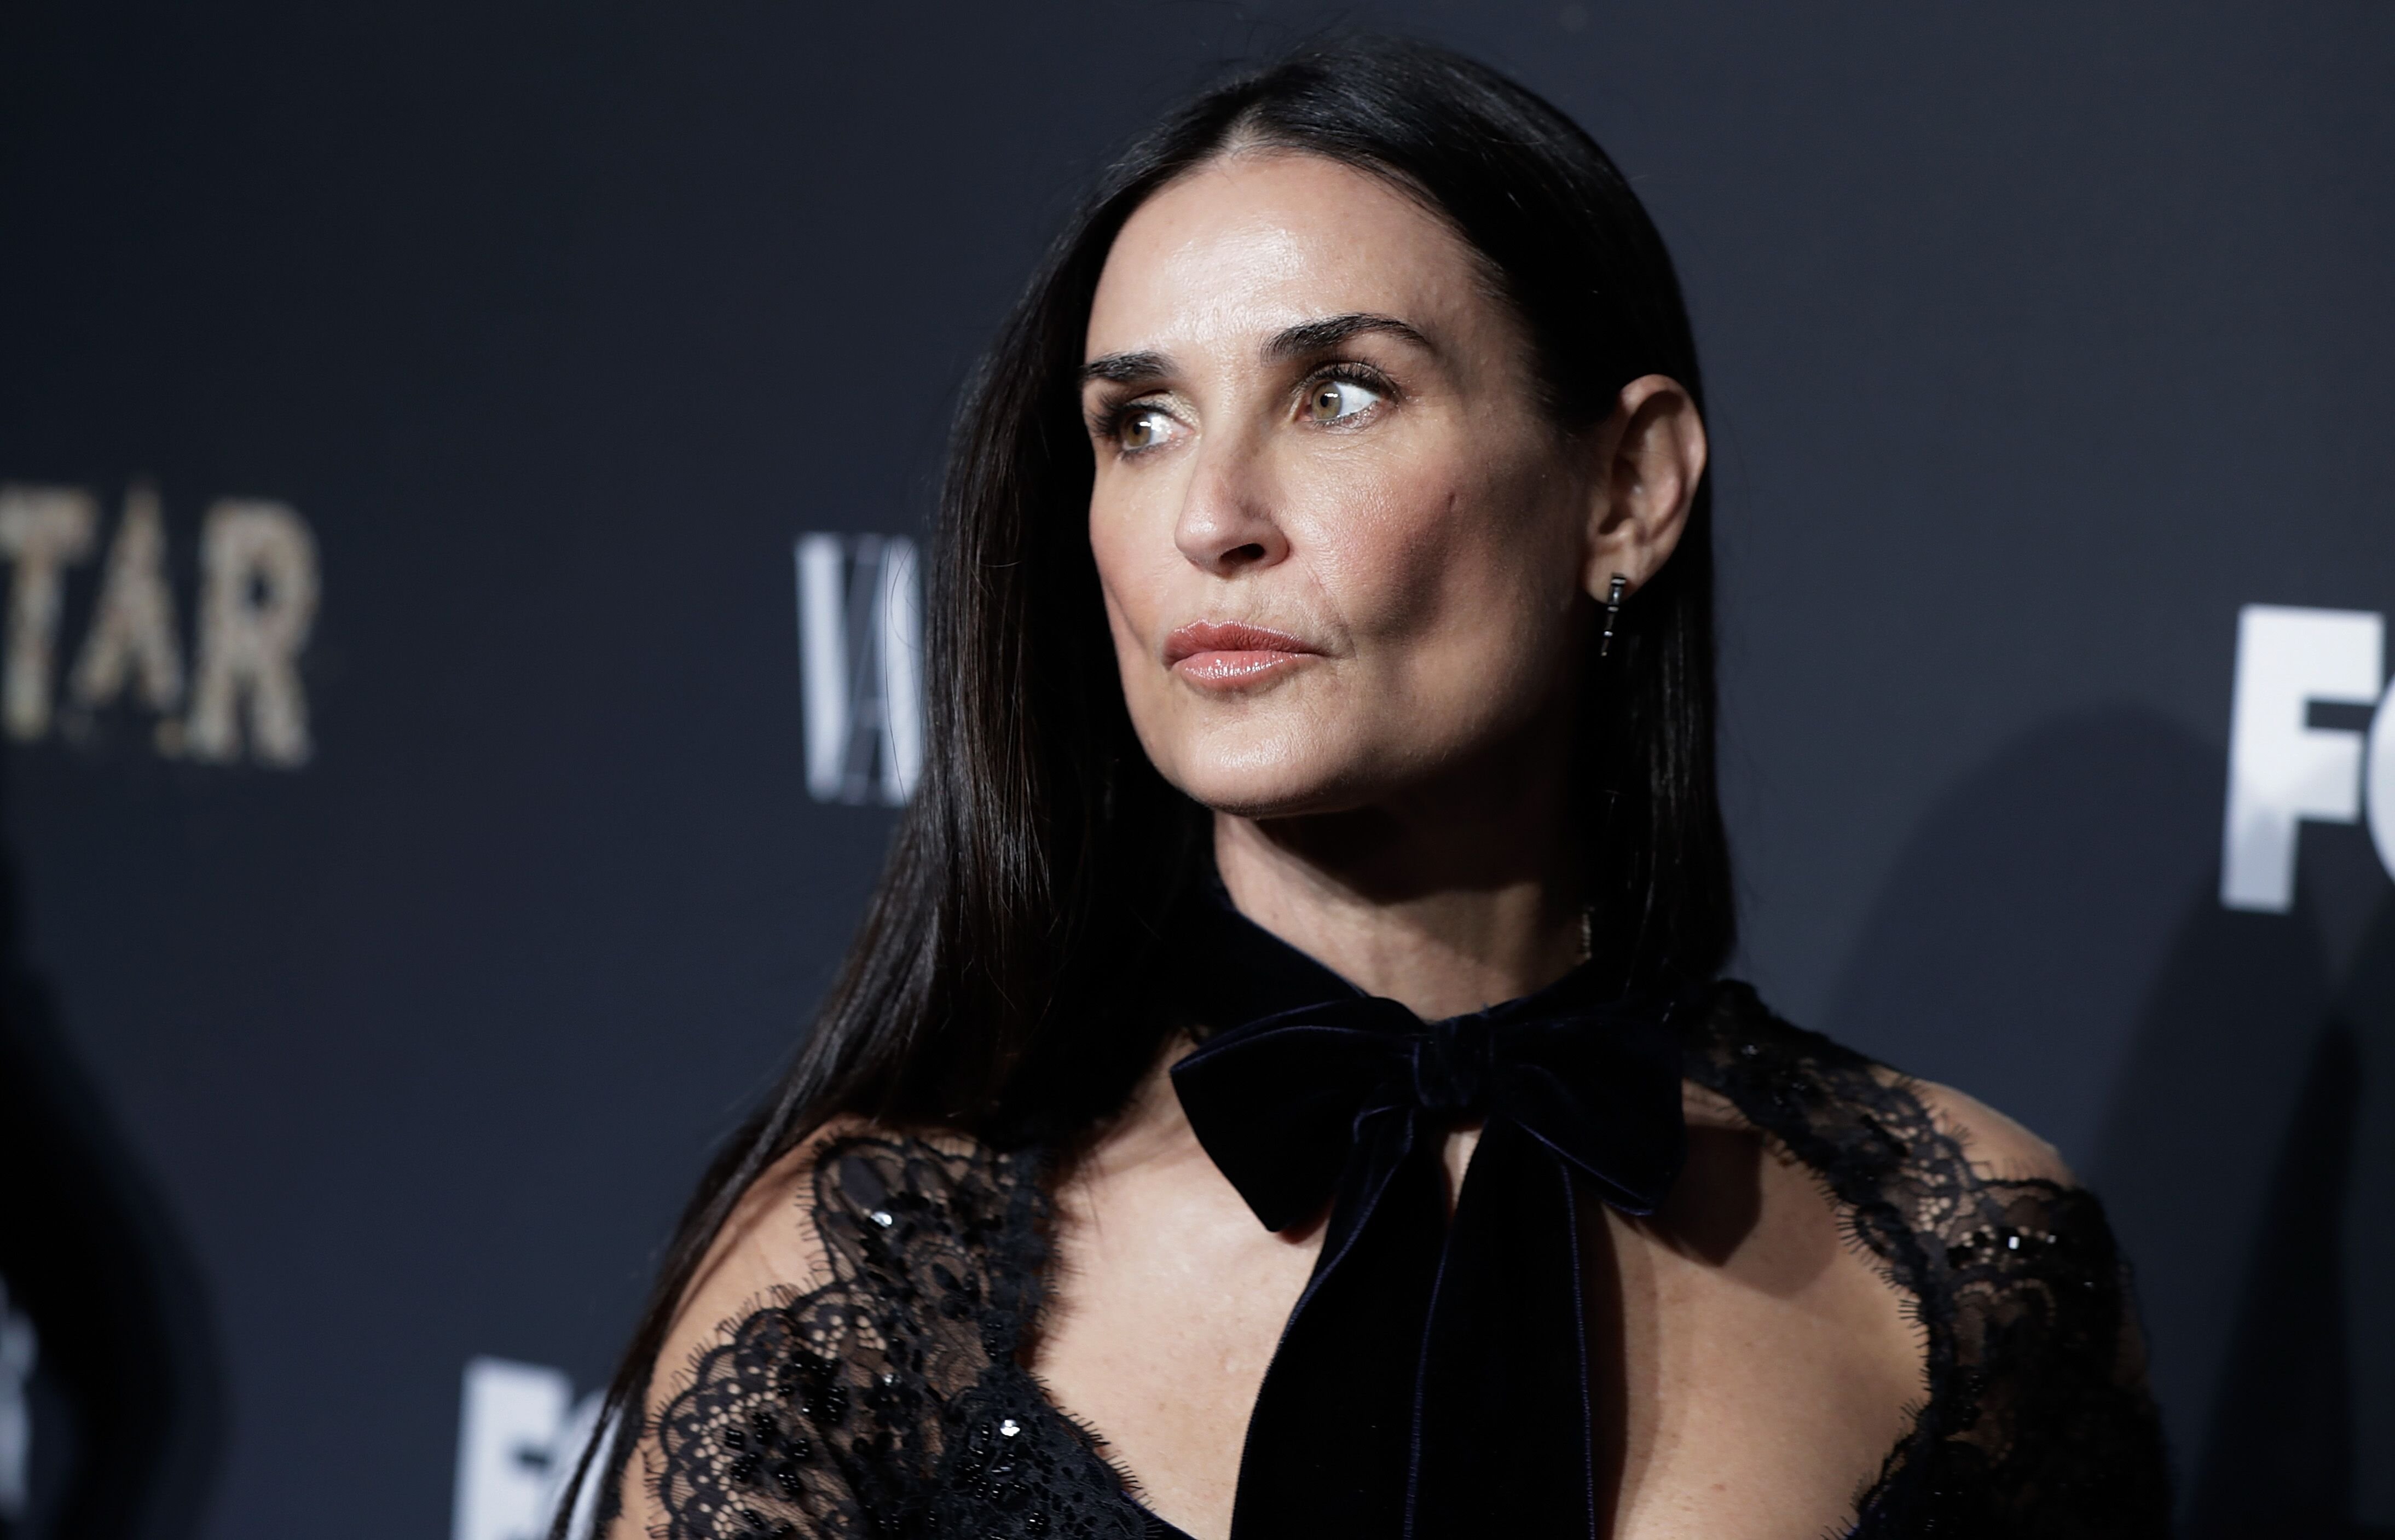 Demi Moore at an event launching "Empire" and "Star" at One World Observatory in 2017 in New York | Source: Getty Images